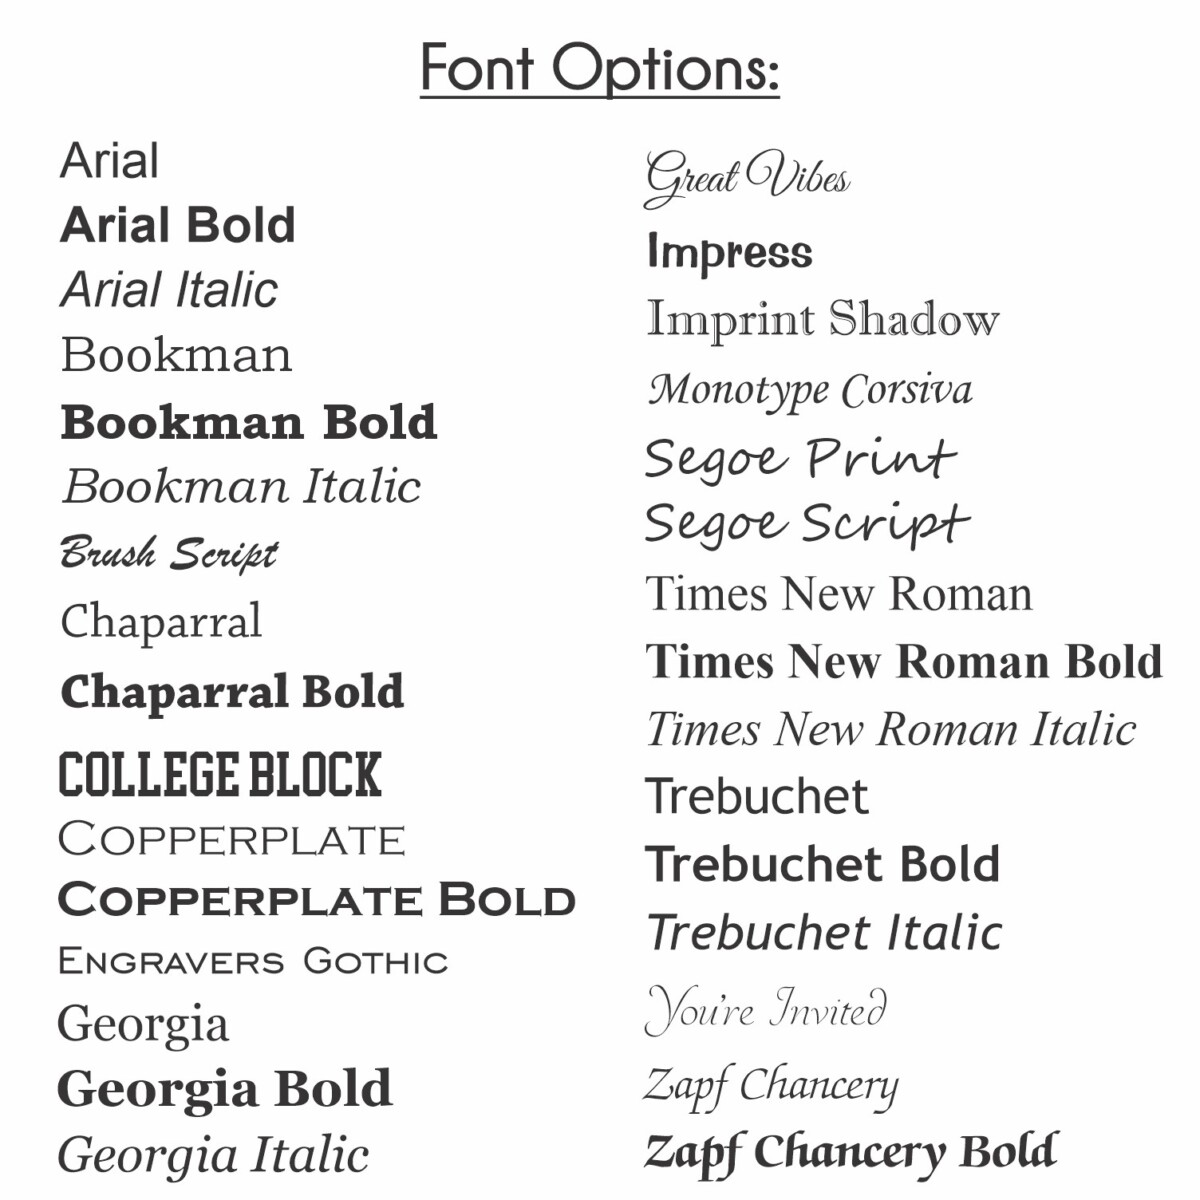 Helix Italic Font Lettering Guide 4 Piece Set (08391)